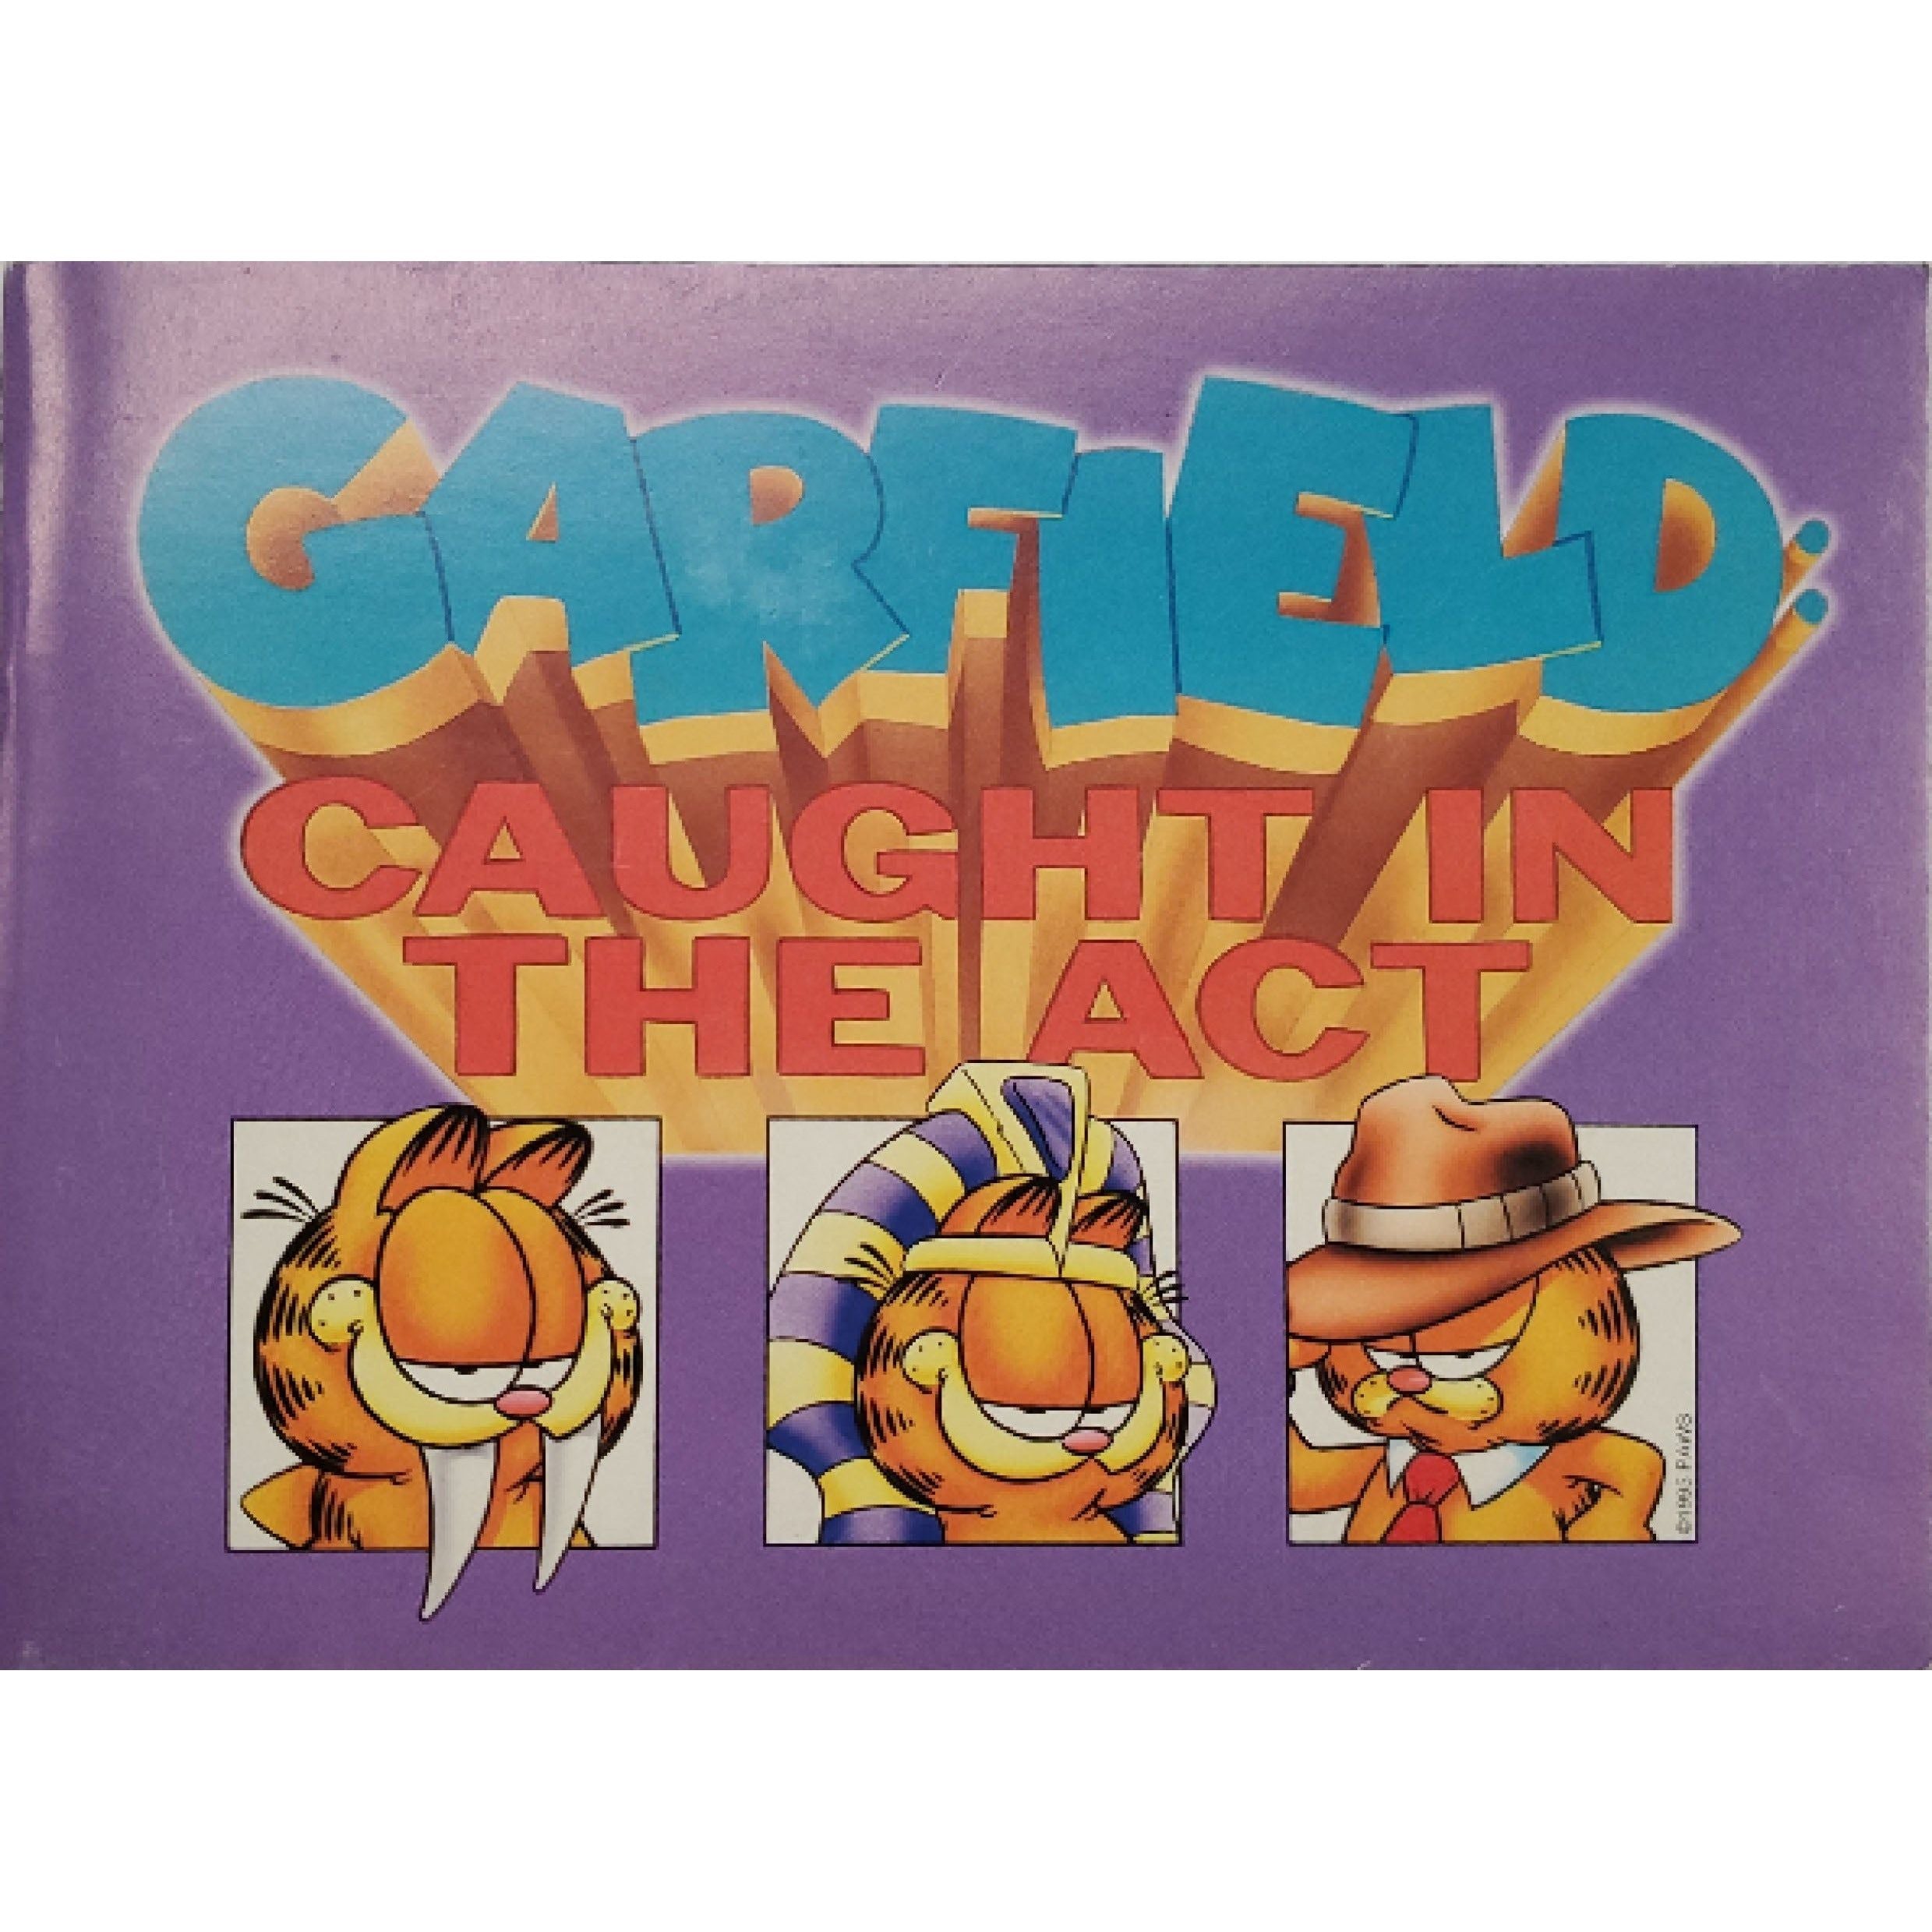 GameGear - Garfield Caught in the Act Comic Book (Manual)